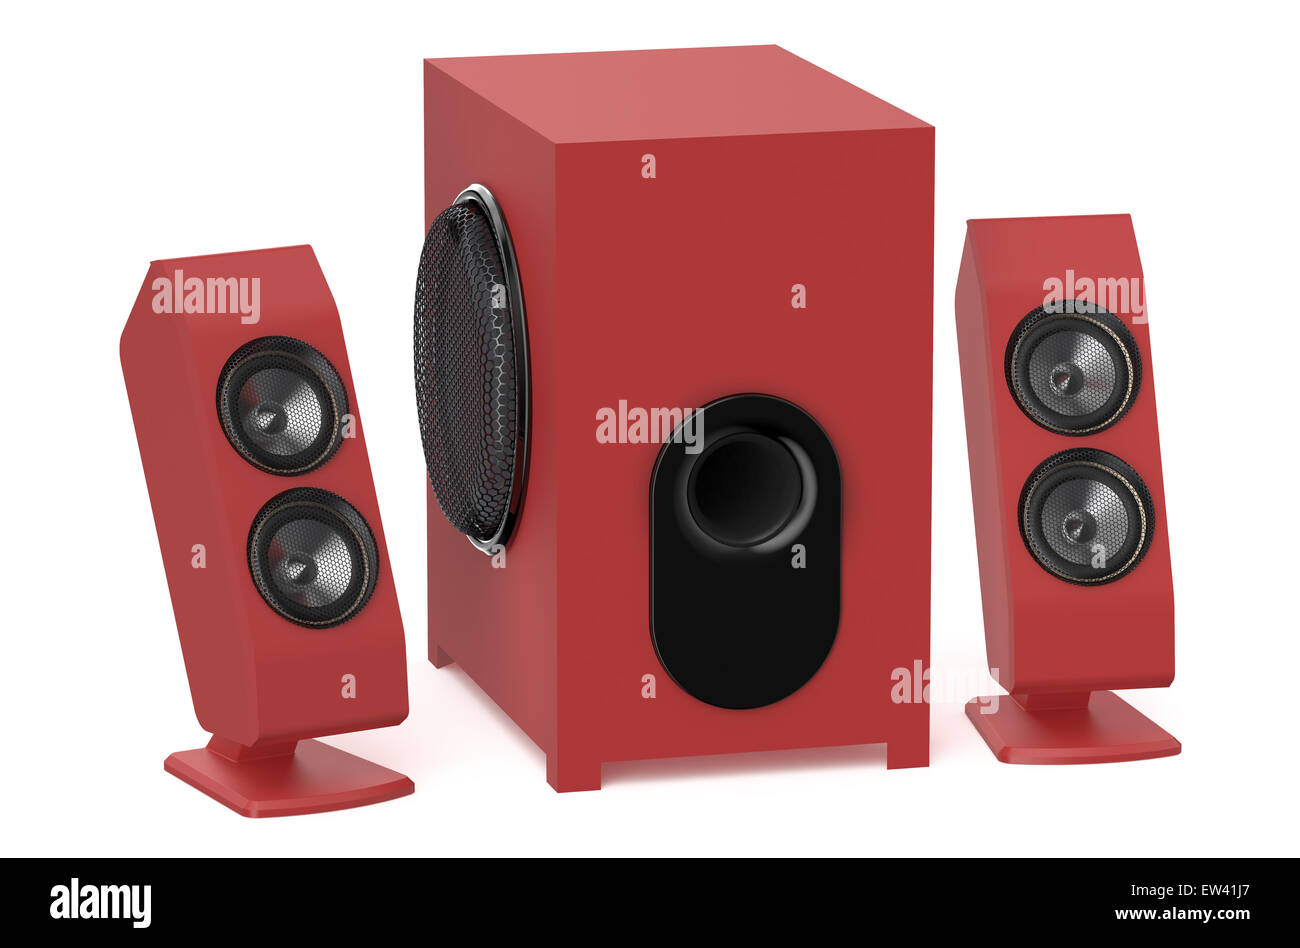 red loudspeakers with subwoofer system 2.1 isolated on white background Stock Photo